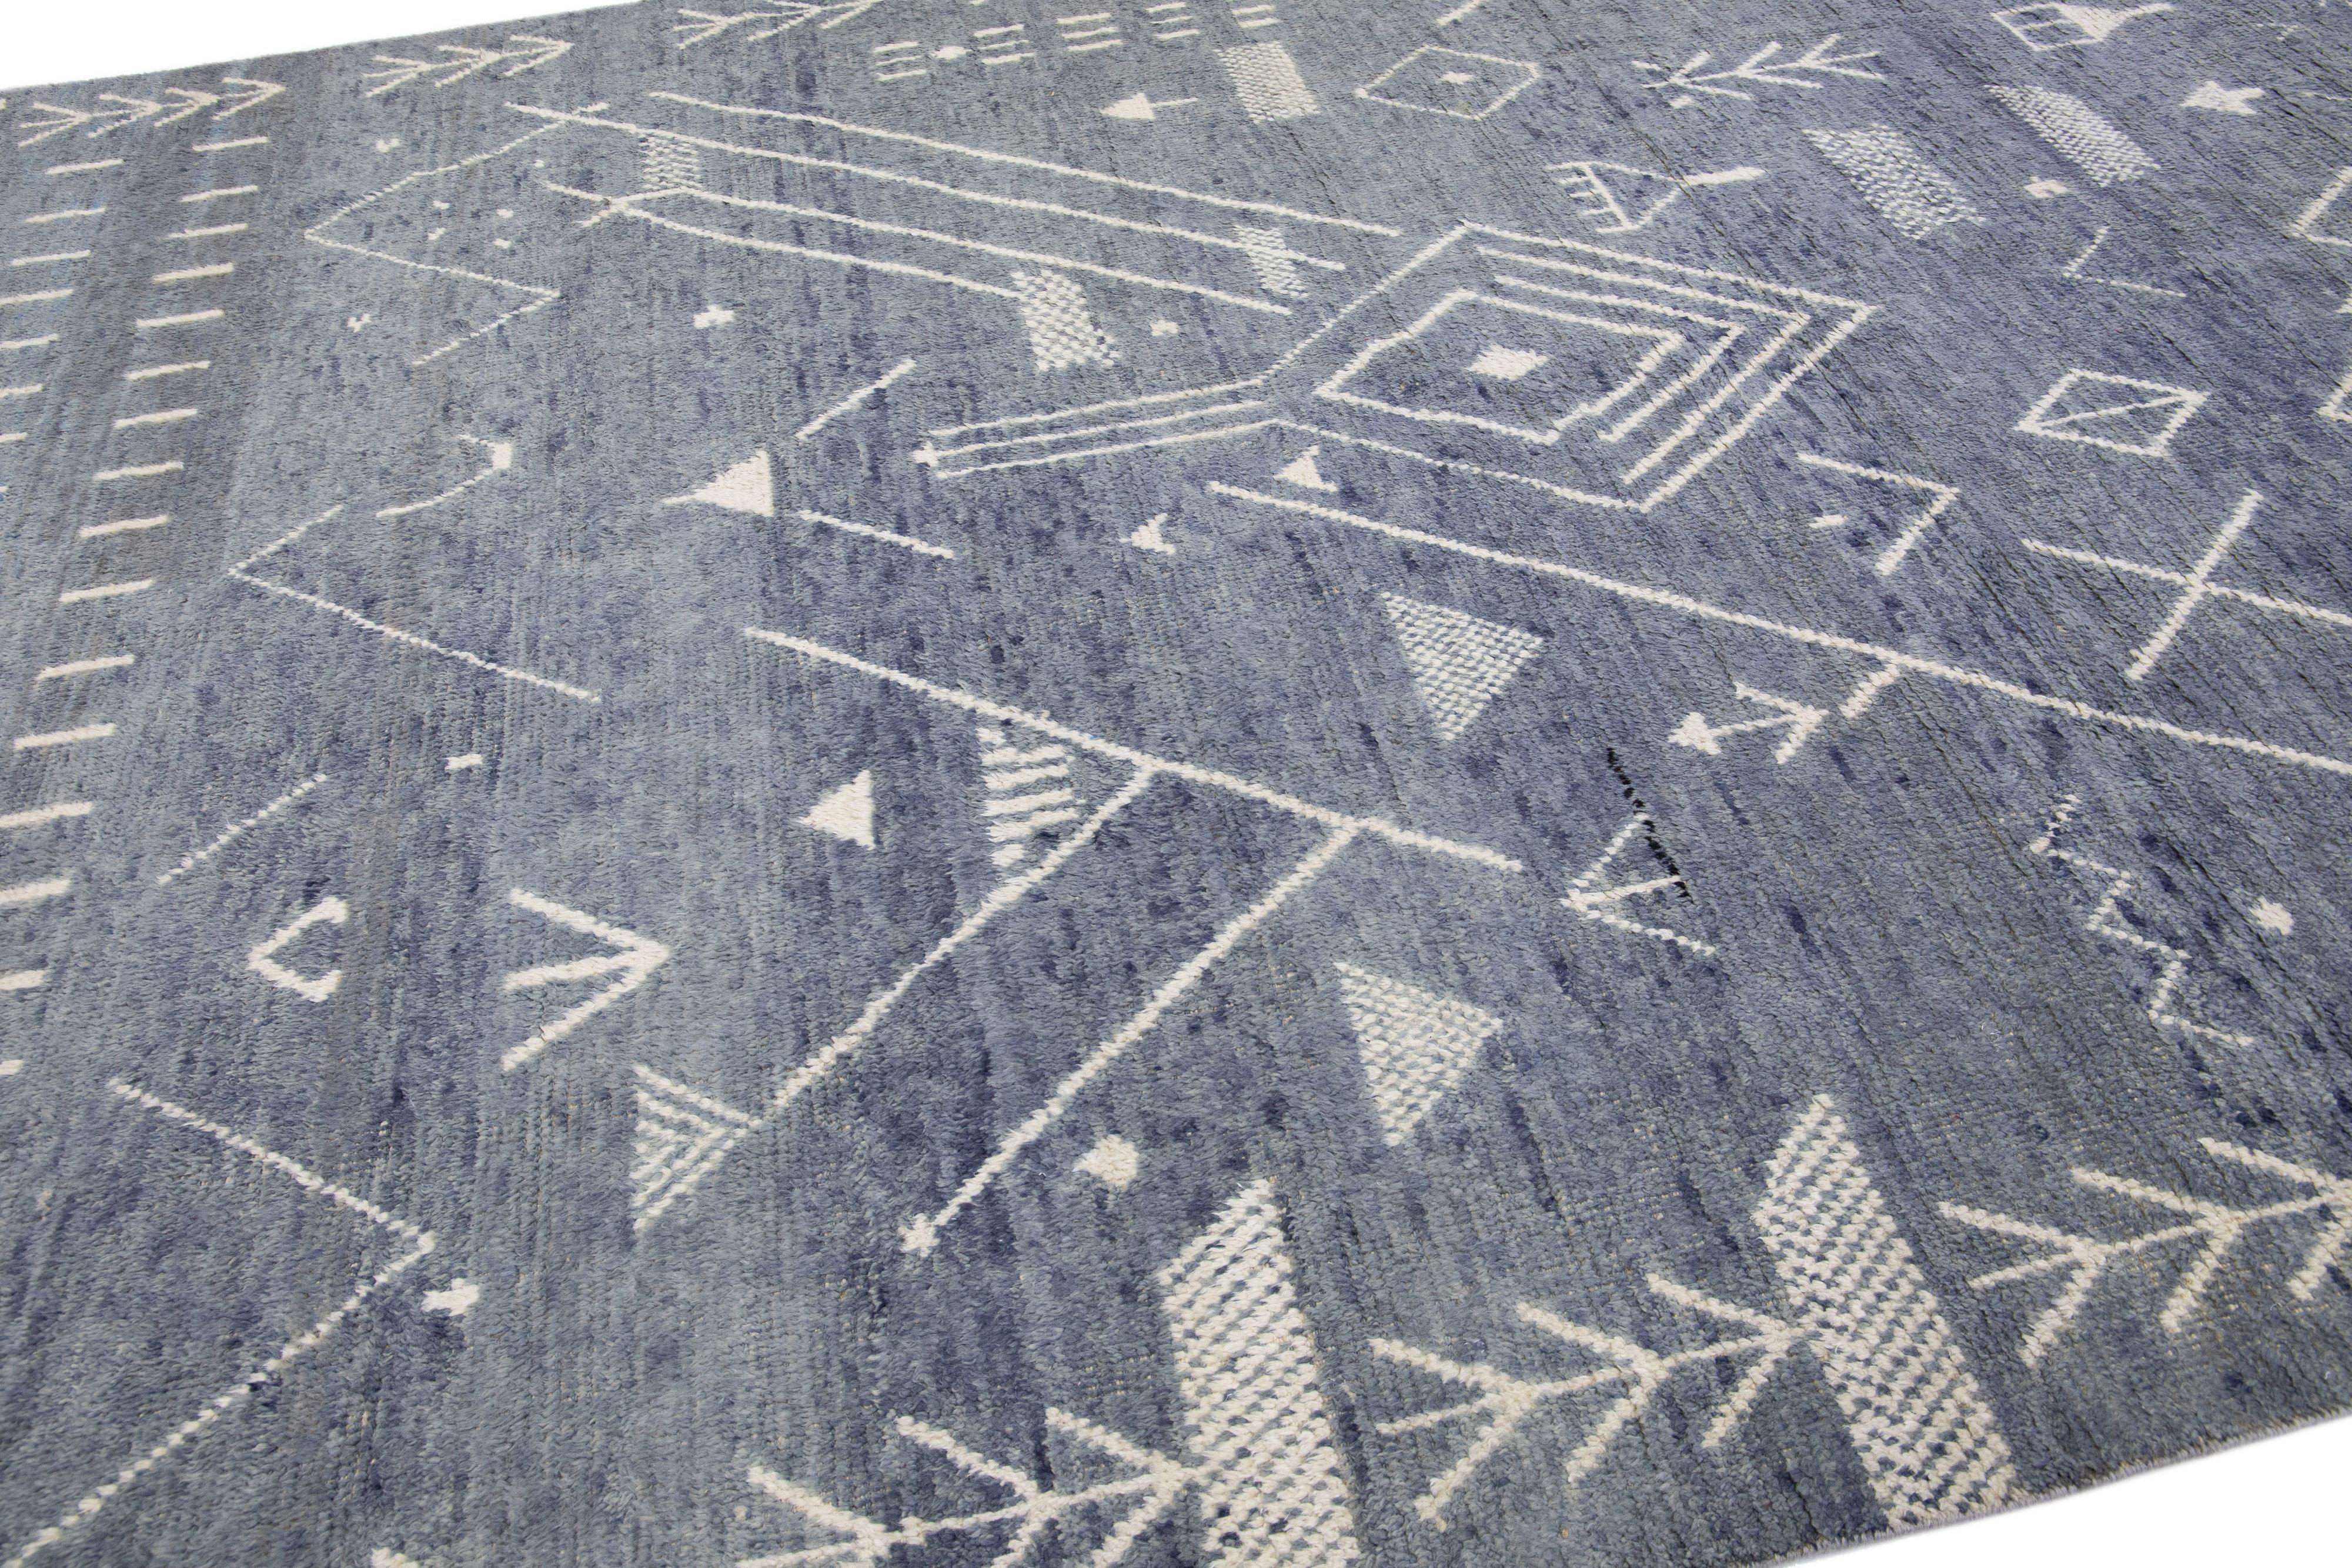 Beautiful moroccan berber style hand-knotted wool rug with a navy blue field. This piece has beige accents in an all-over geometric art deco design.

This rug measures: 9' x 12'1